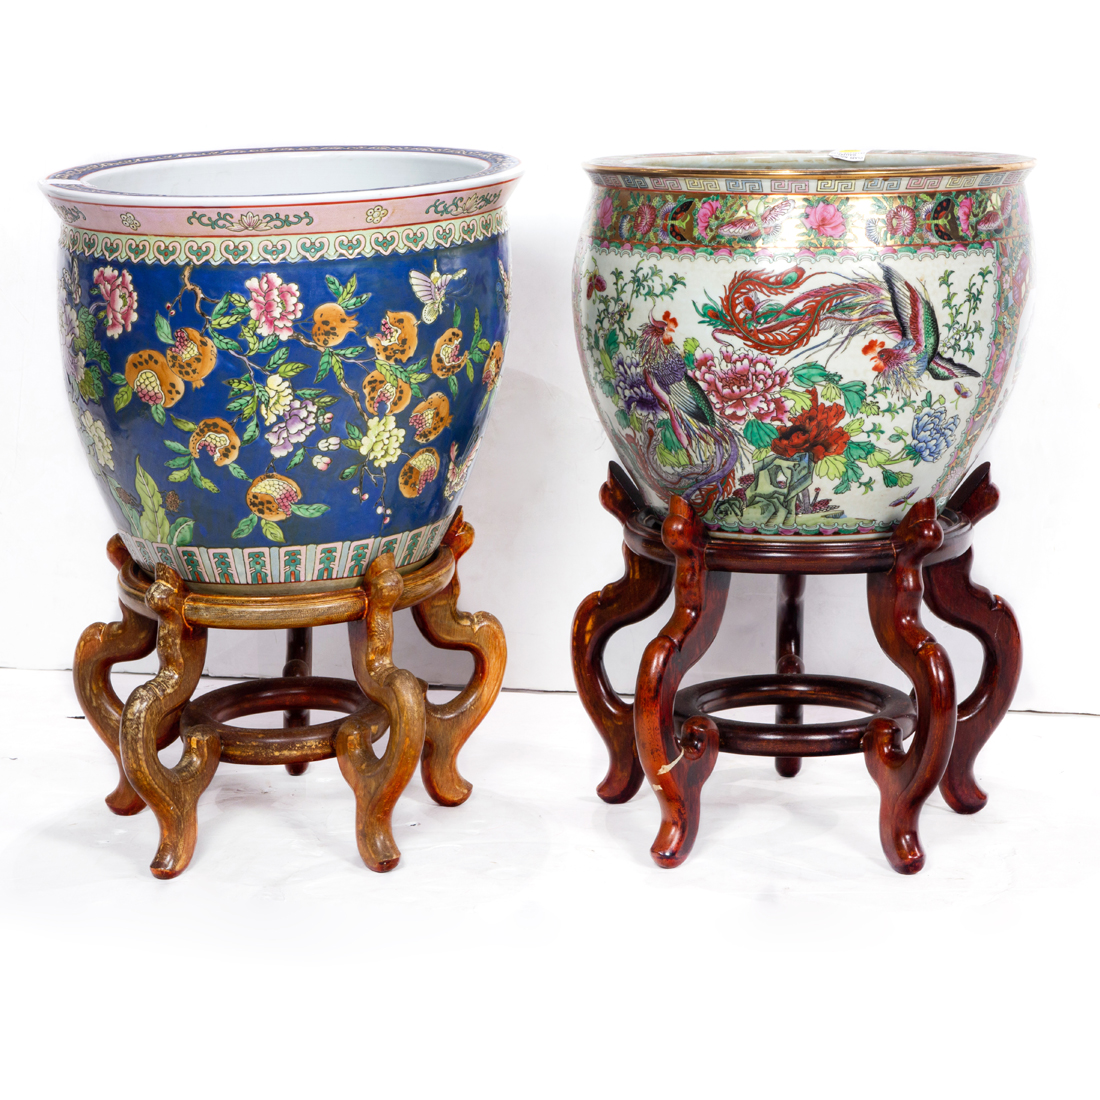 TWO CHINESE FAMILLE ROSE FISH BOWLS